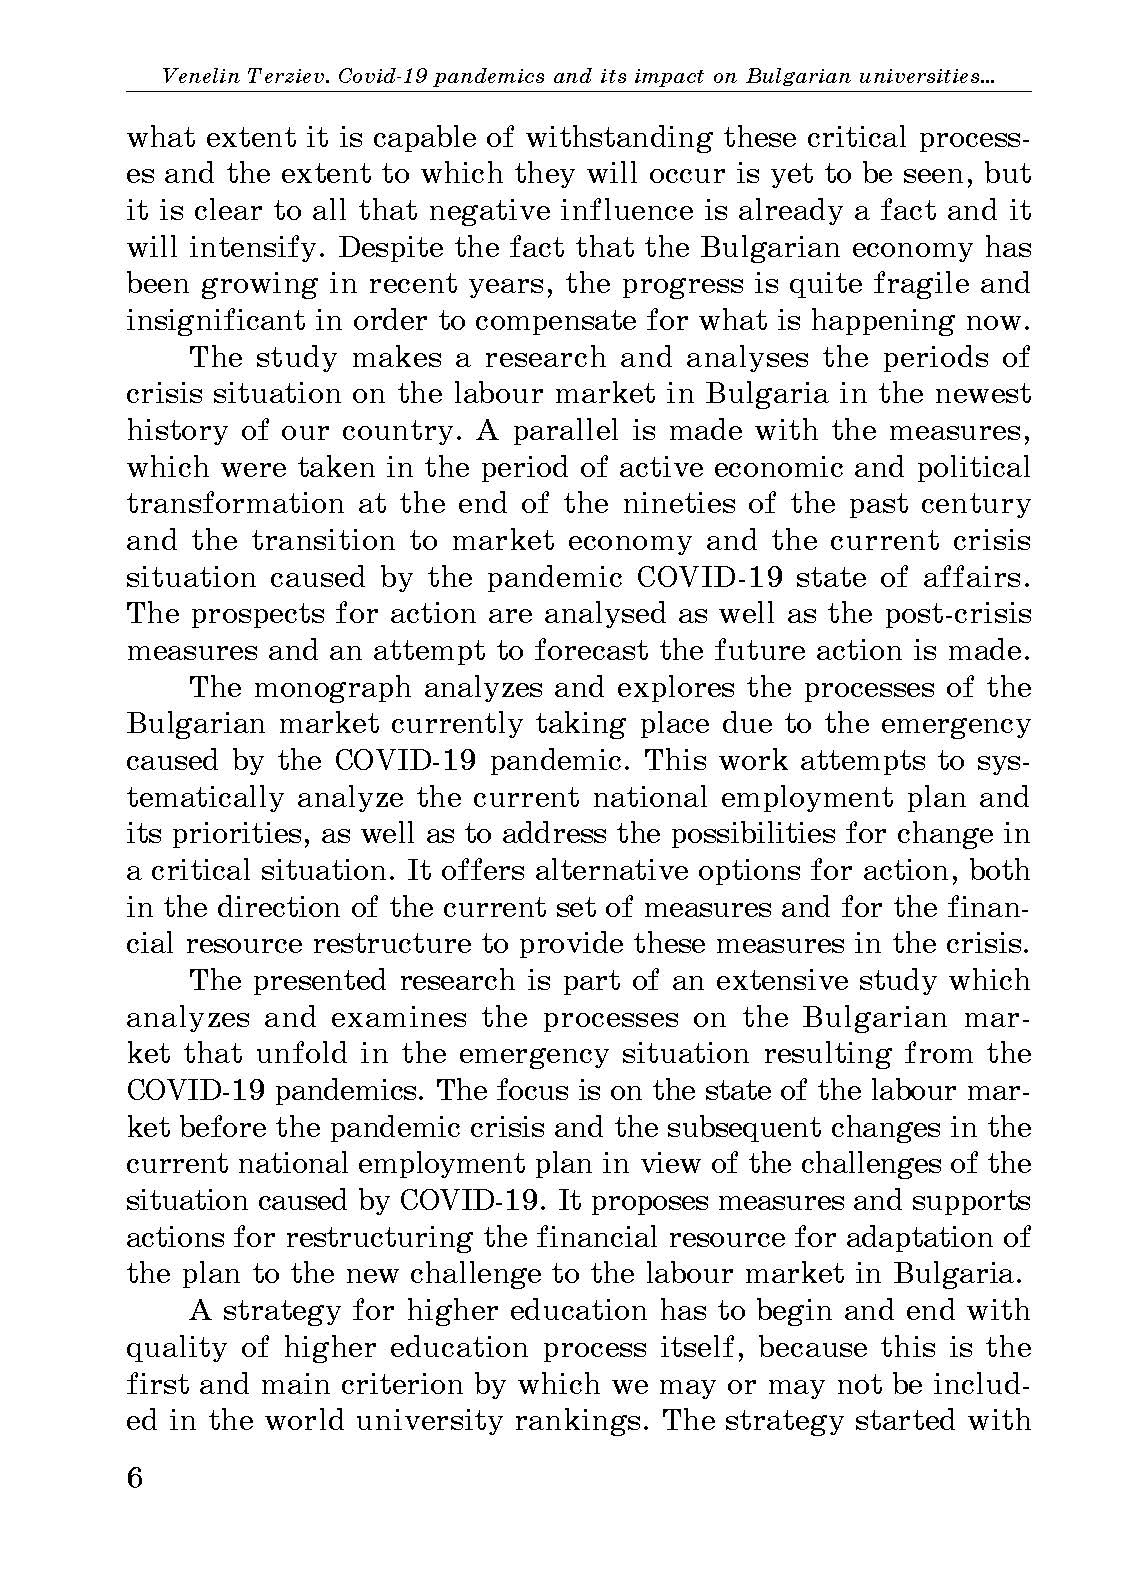 COVID‑19 pandemics and its impact on Bulgarian universities in the context of the new challenges to social system and labour market policies. Автор — Venelin Terziev. 